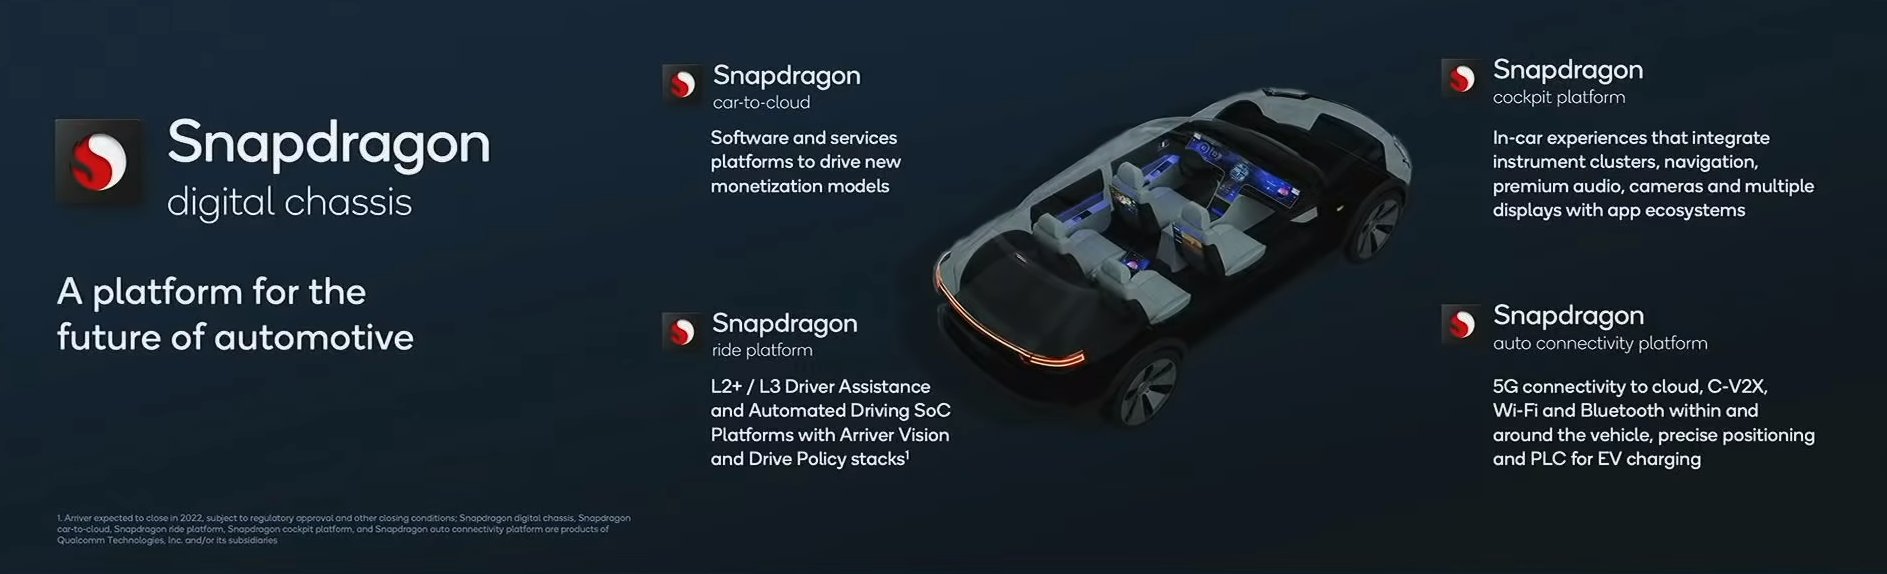 Qualcomm - Snapdragon Digital Chassis -Automotive- Counterpoint Research